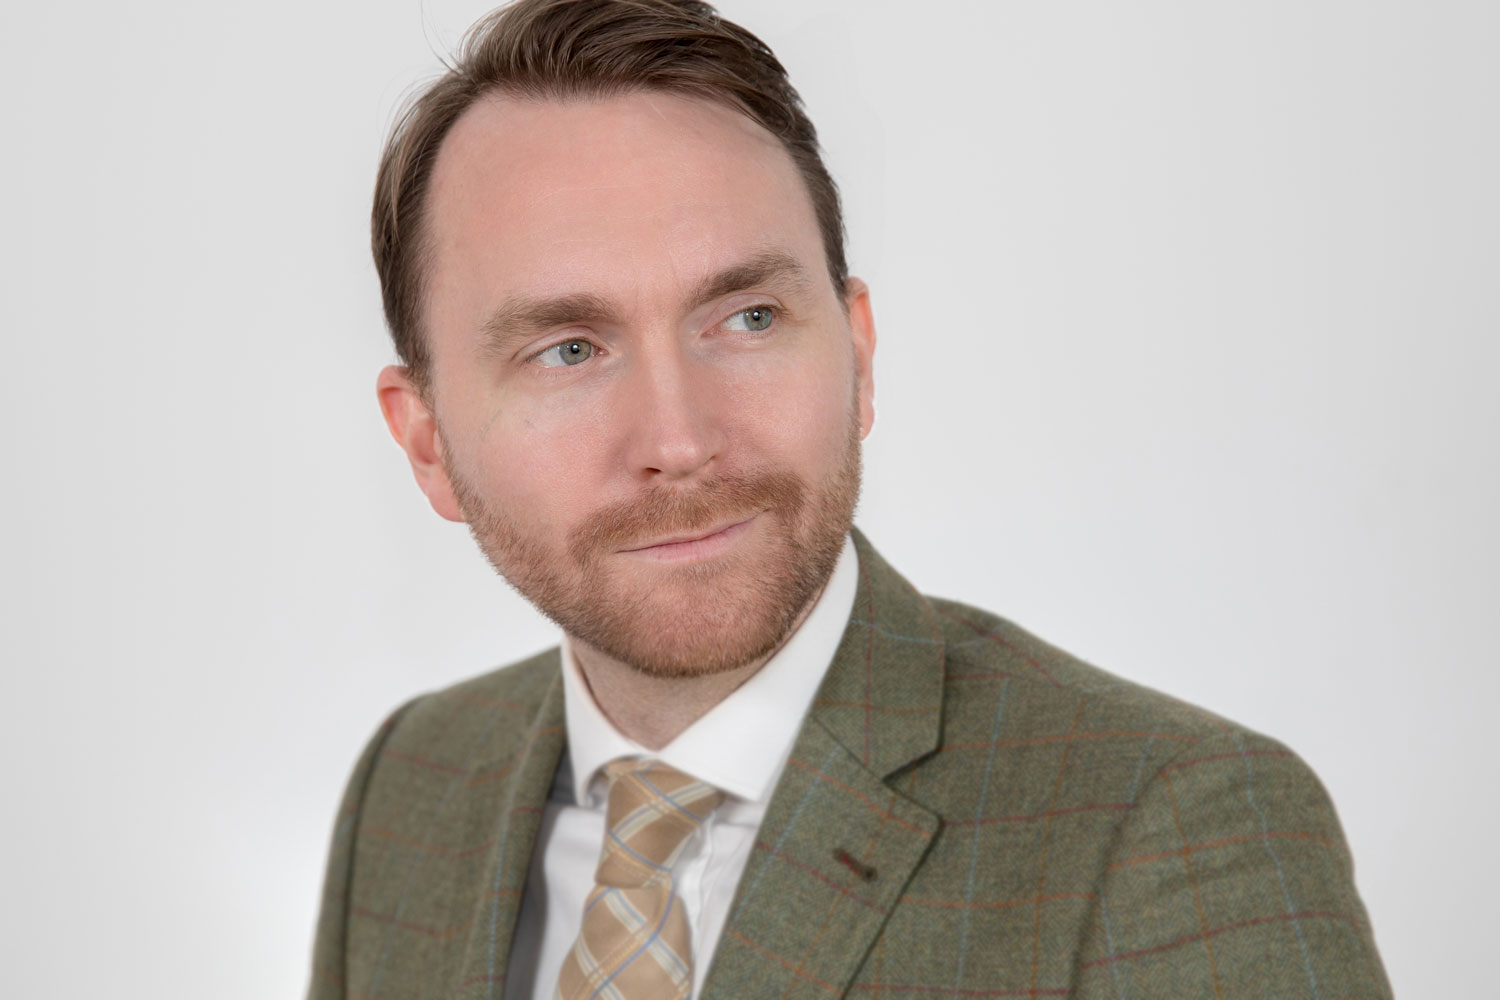 60 seconds with Stephen Horton, family law